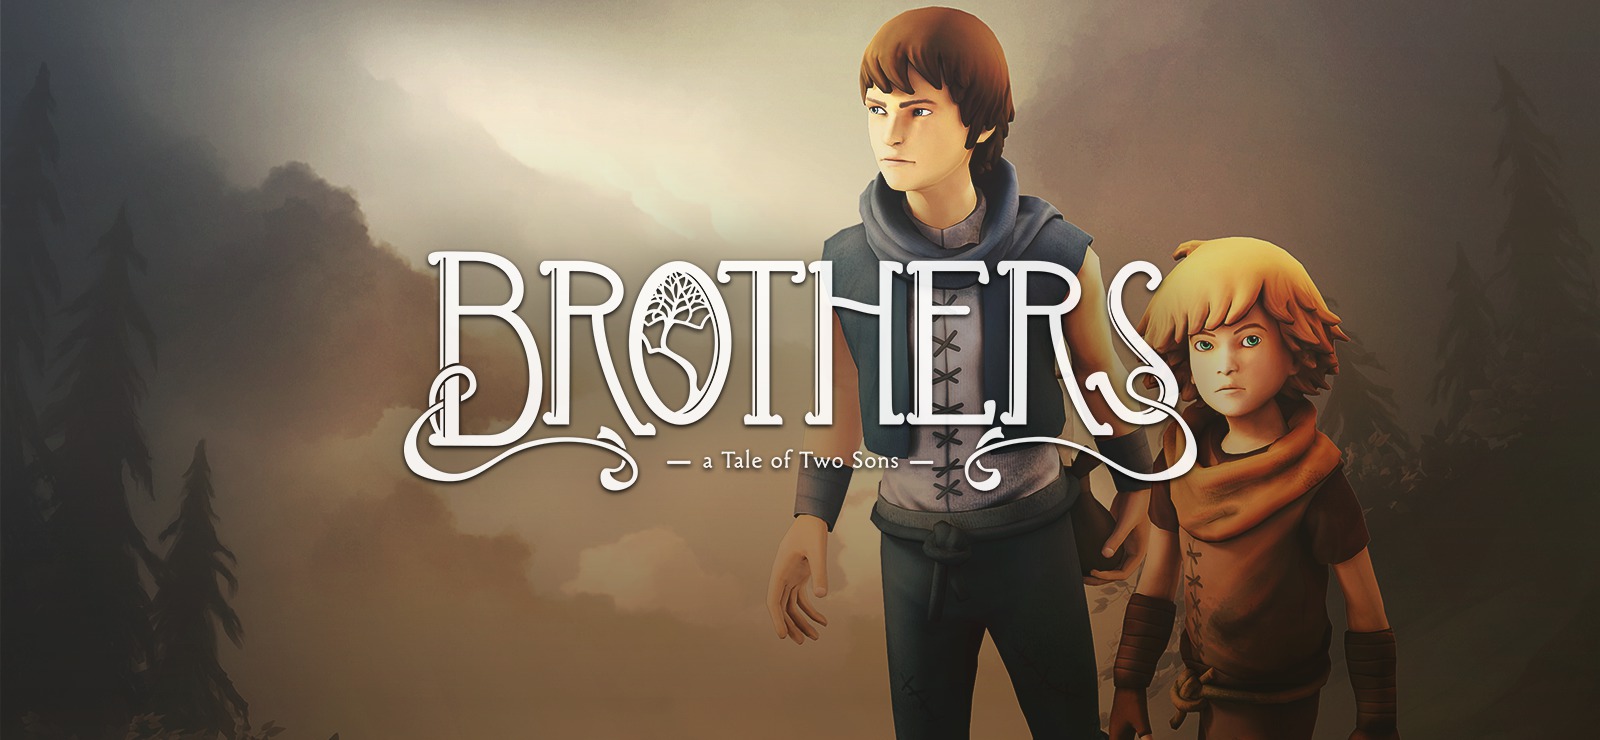 Brothers two sons на двоих. Brothers: a Tale of two sons обложка. Brothers игра. Игра брат. Игра brothers a Tale.